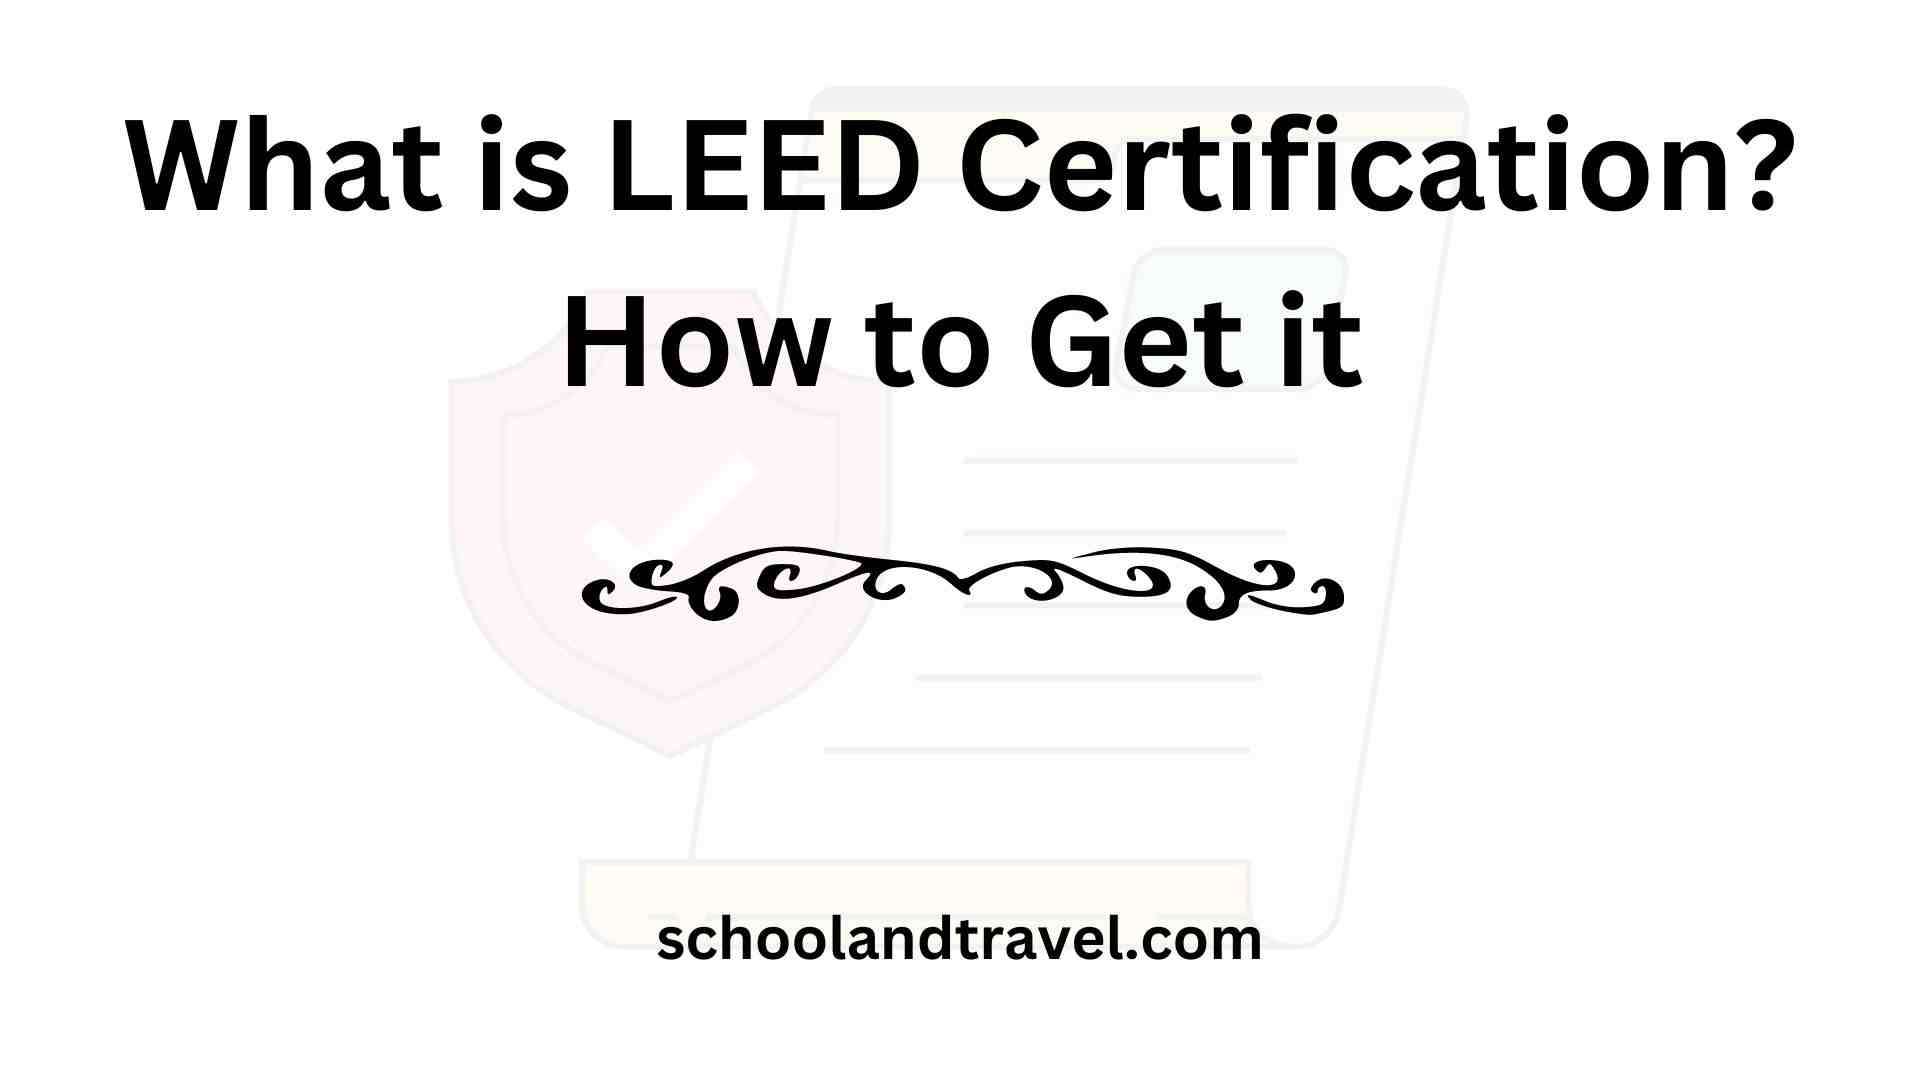 What is LEED Certification?